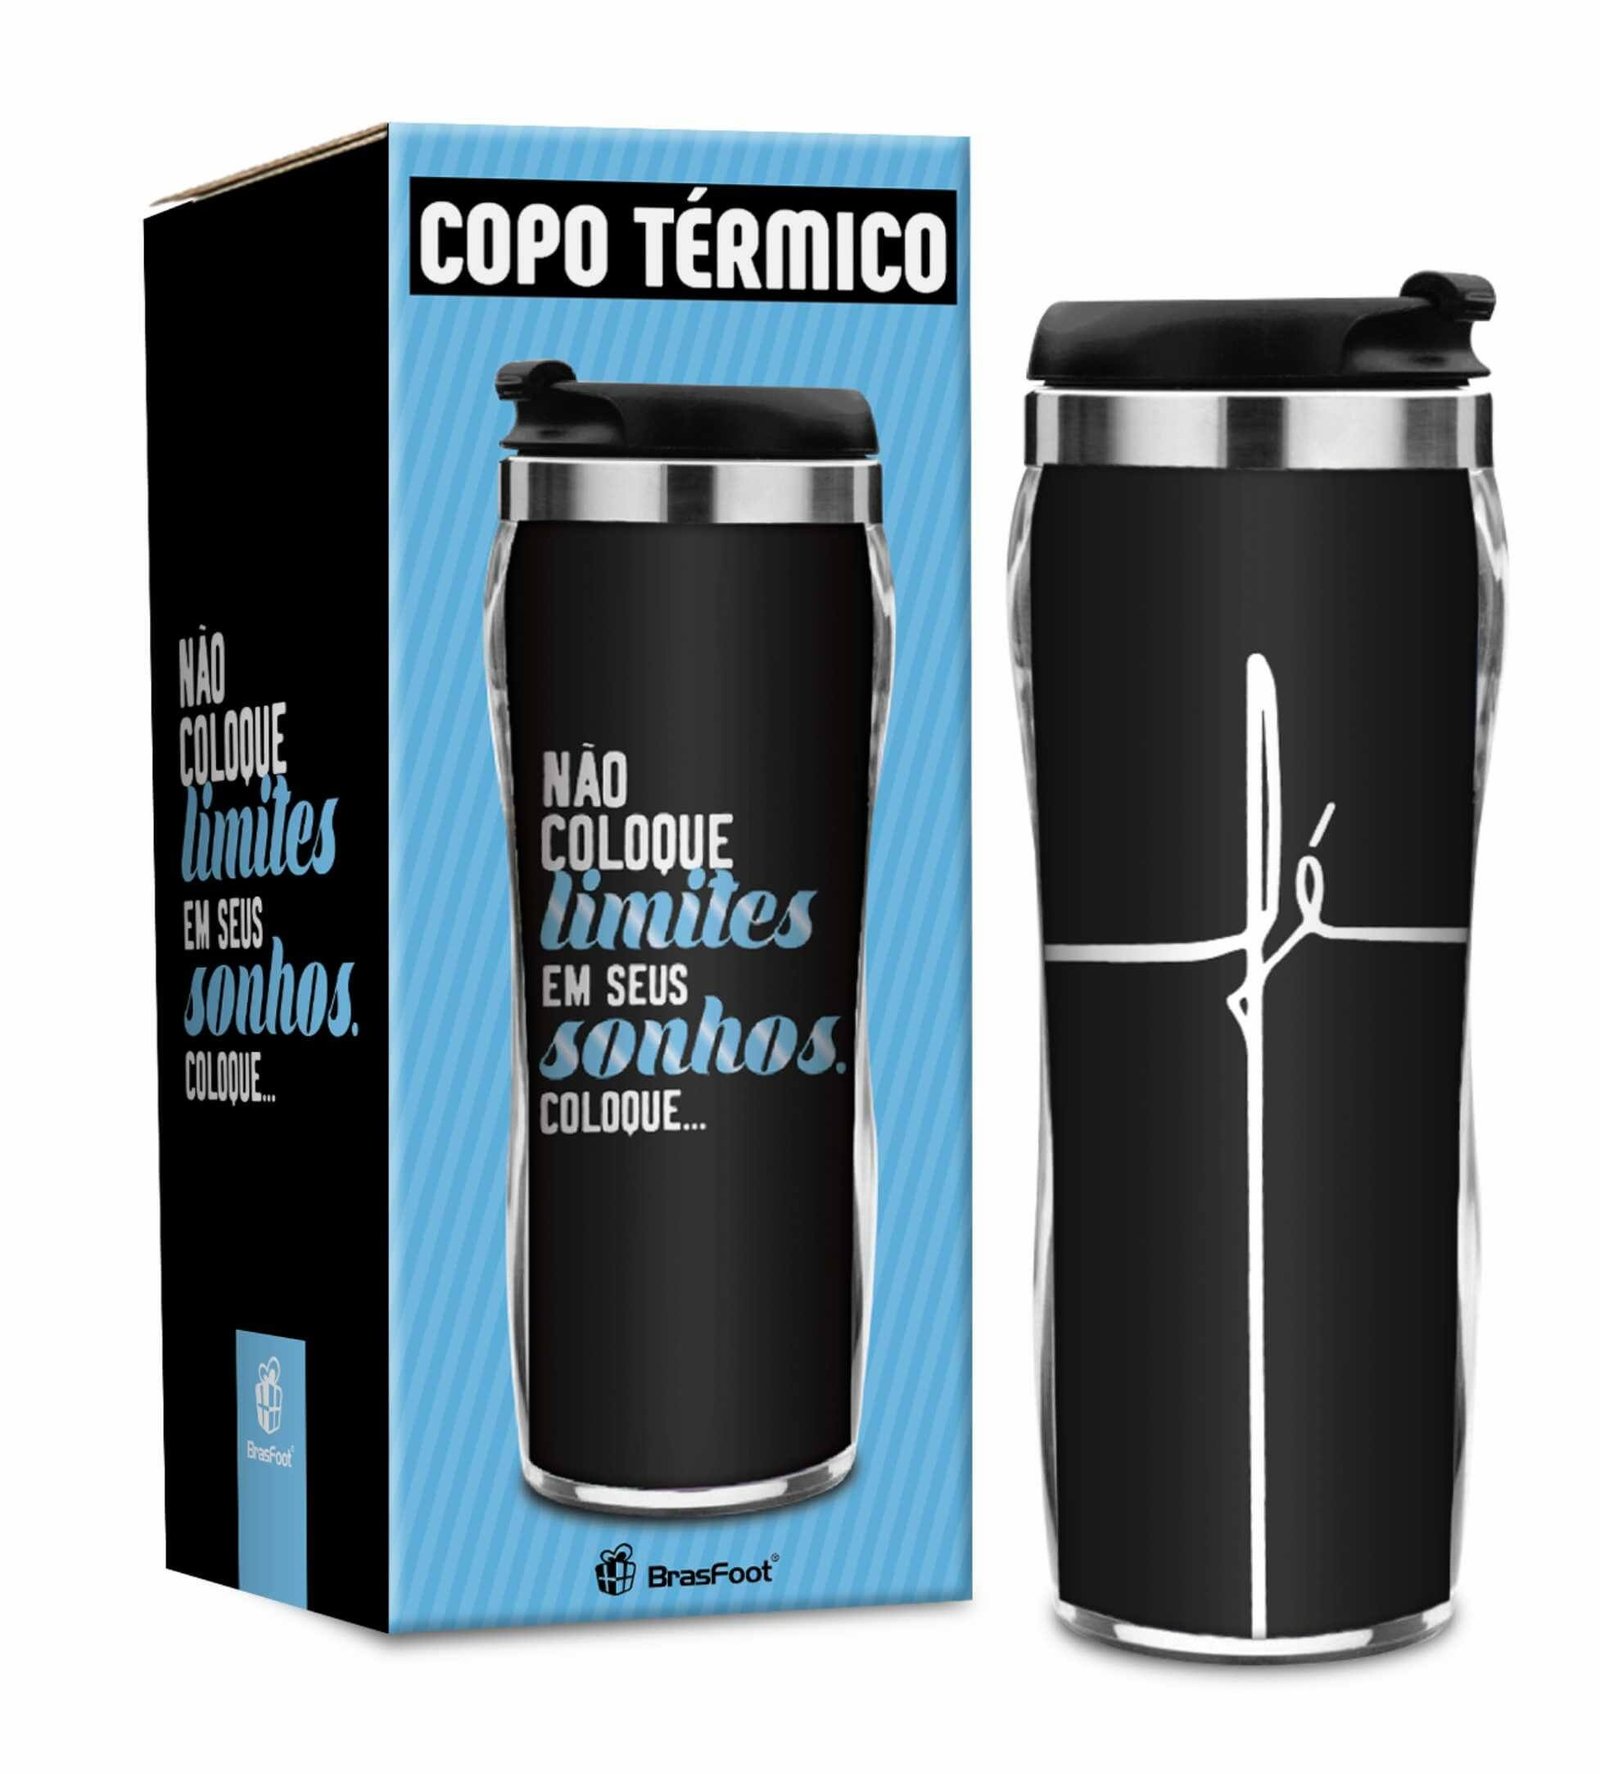 ptl-290-08-thermal_cup-n_o_coloque_limites_3d_2_.jpg